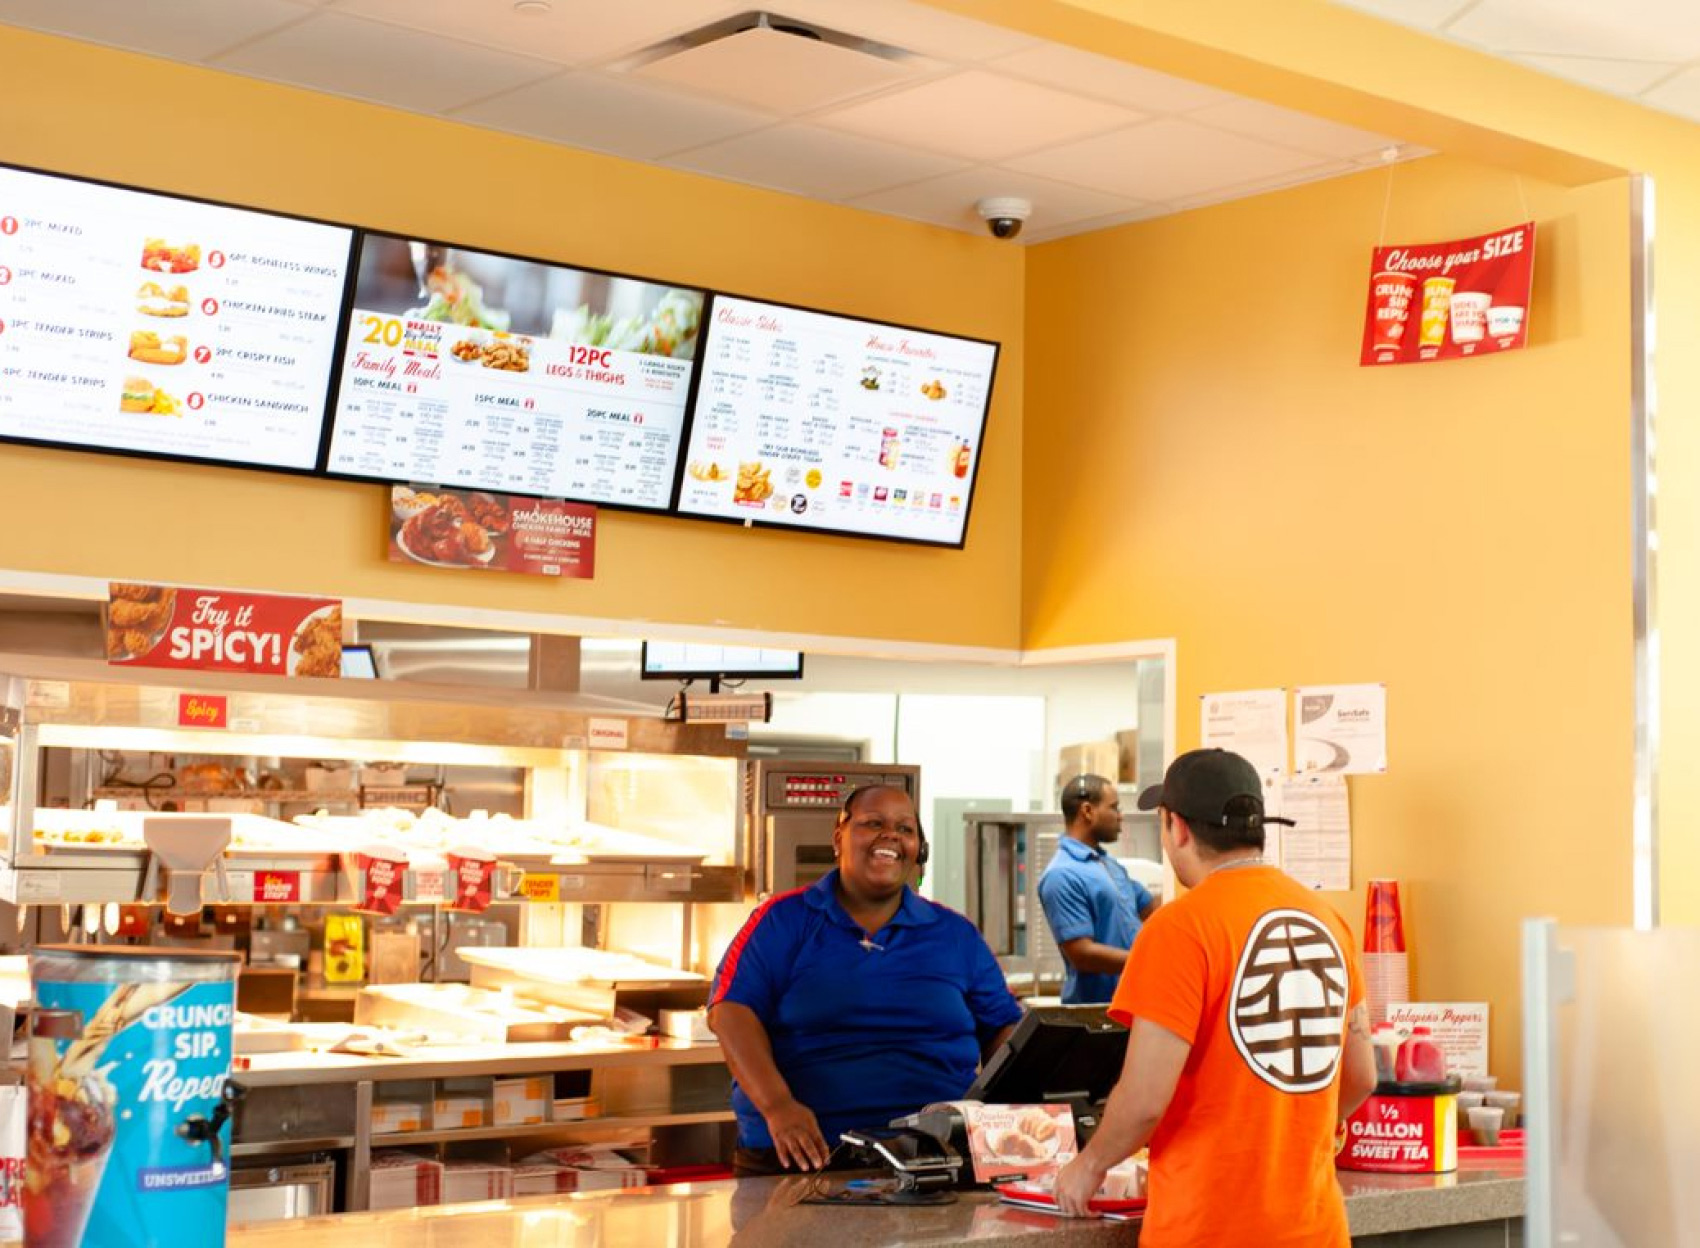 A smiling cashier helps a customer at the counter with branded signage and three digital menu displays behind them. 							